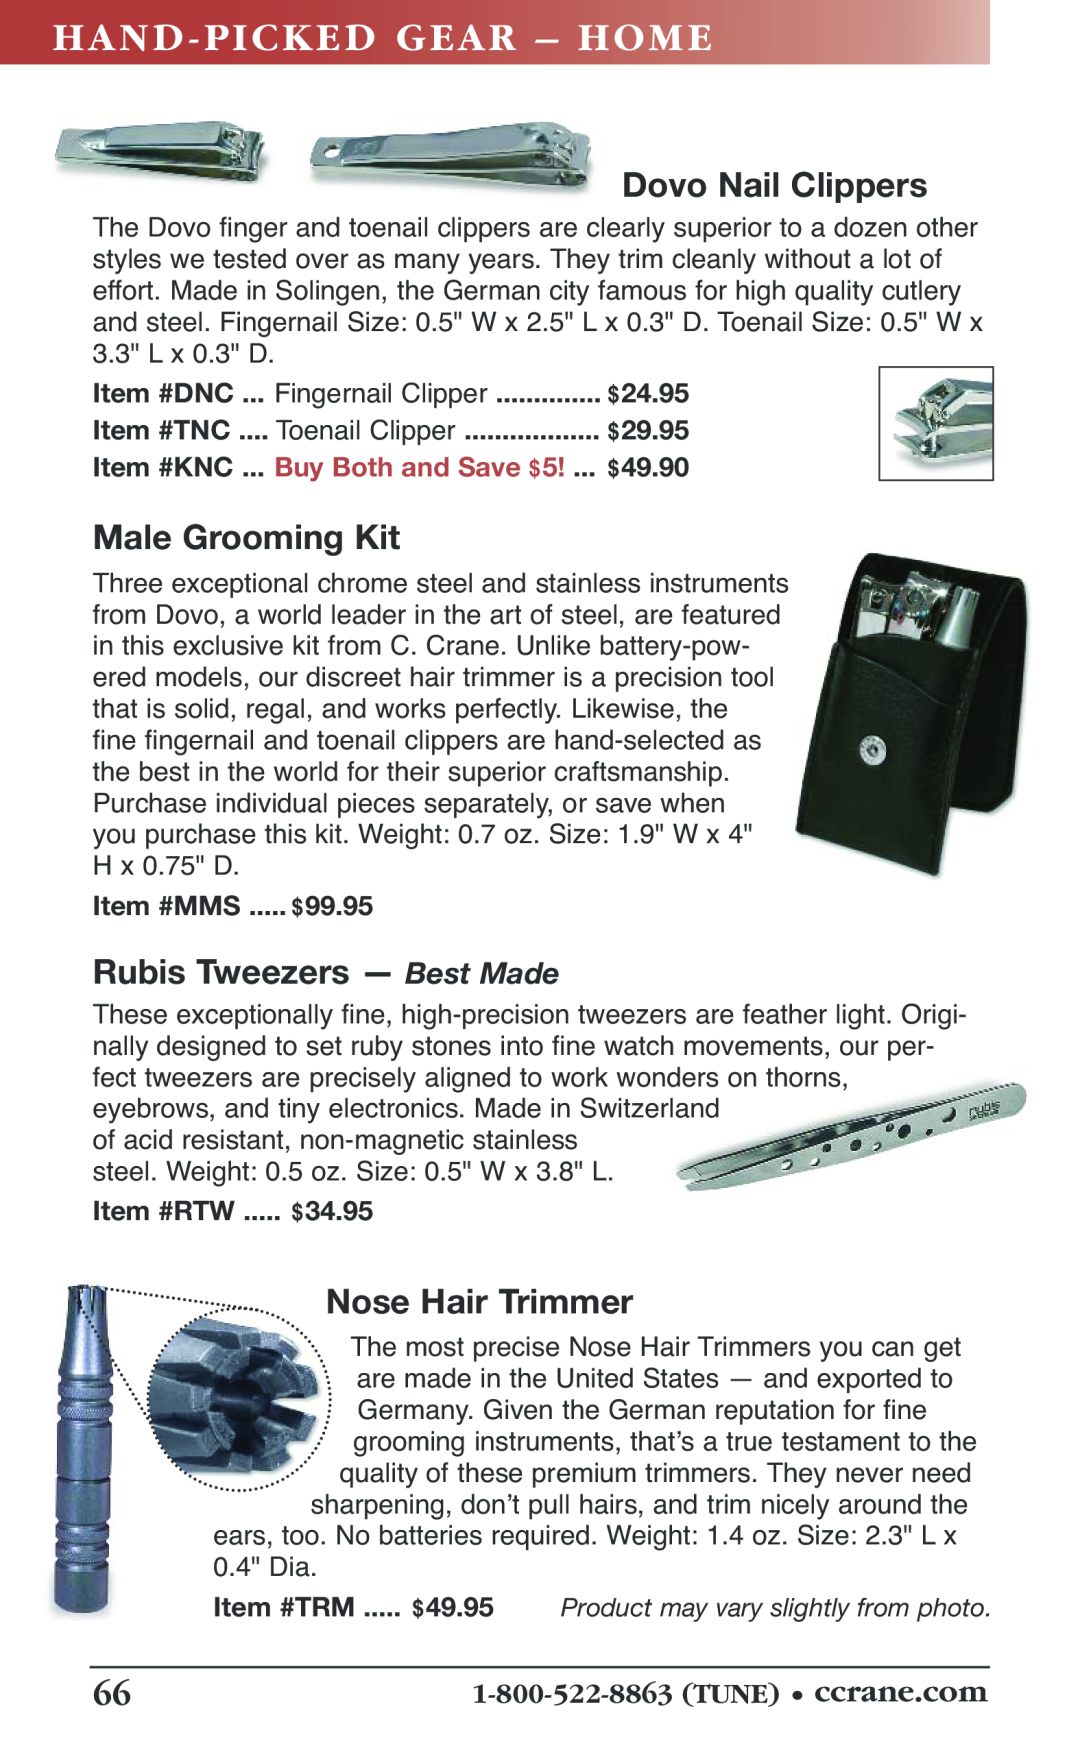 C. Crane 19f Hand -Picke D Gear – Ho Me, Dovo Nail Clipp rs, Male Grooming Kit, Nose Hair Trimmer, L x 0.3 D, Item #DNC 